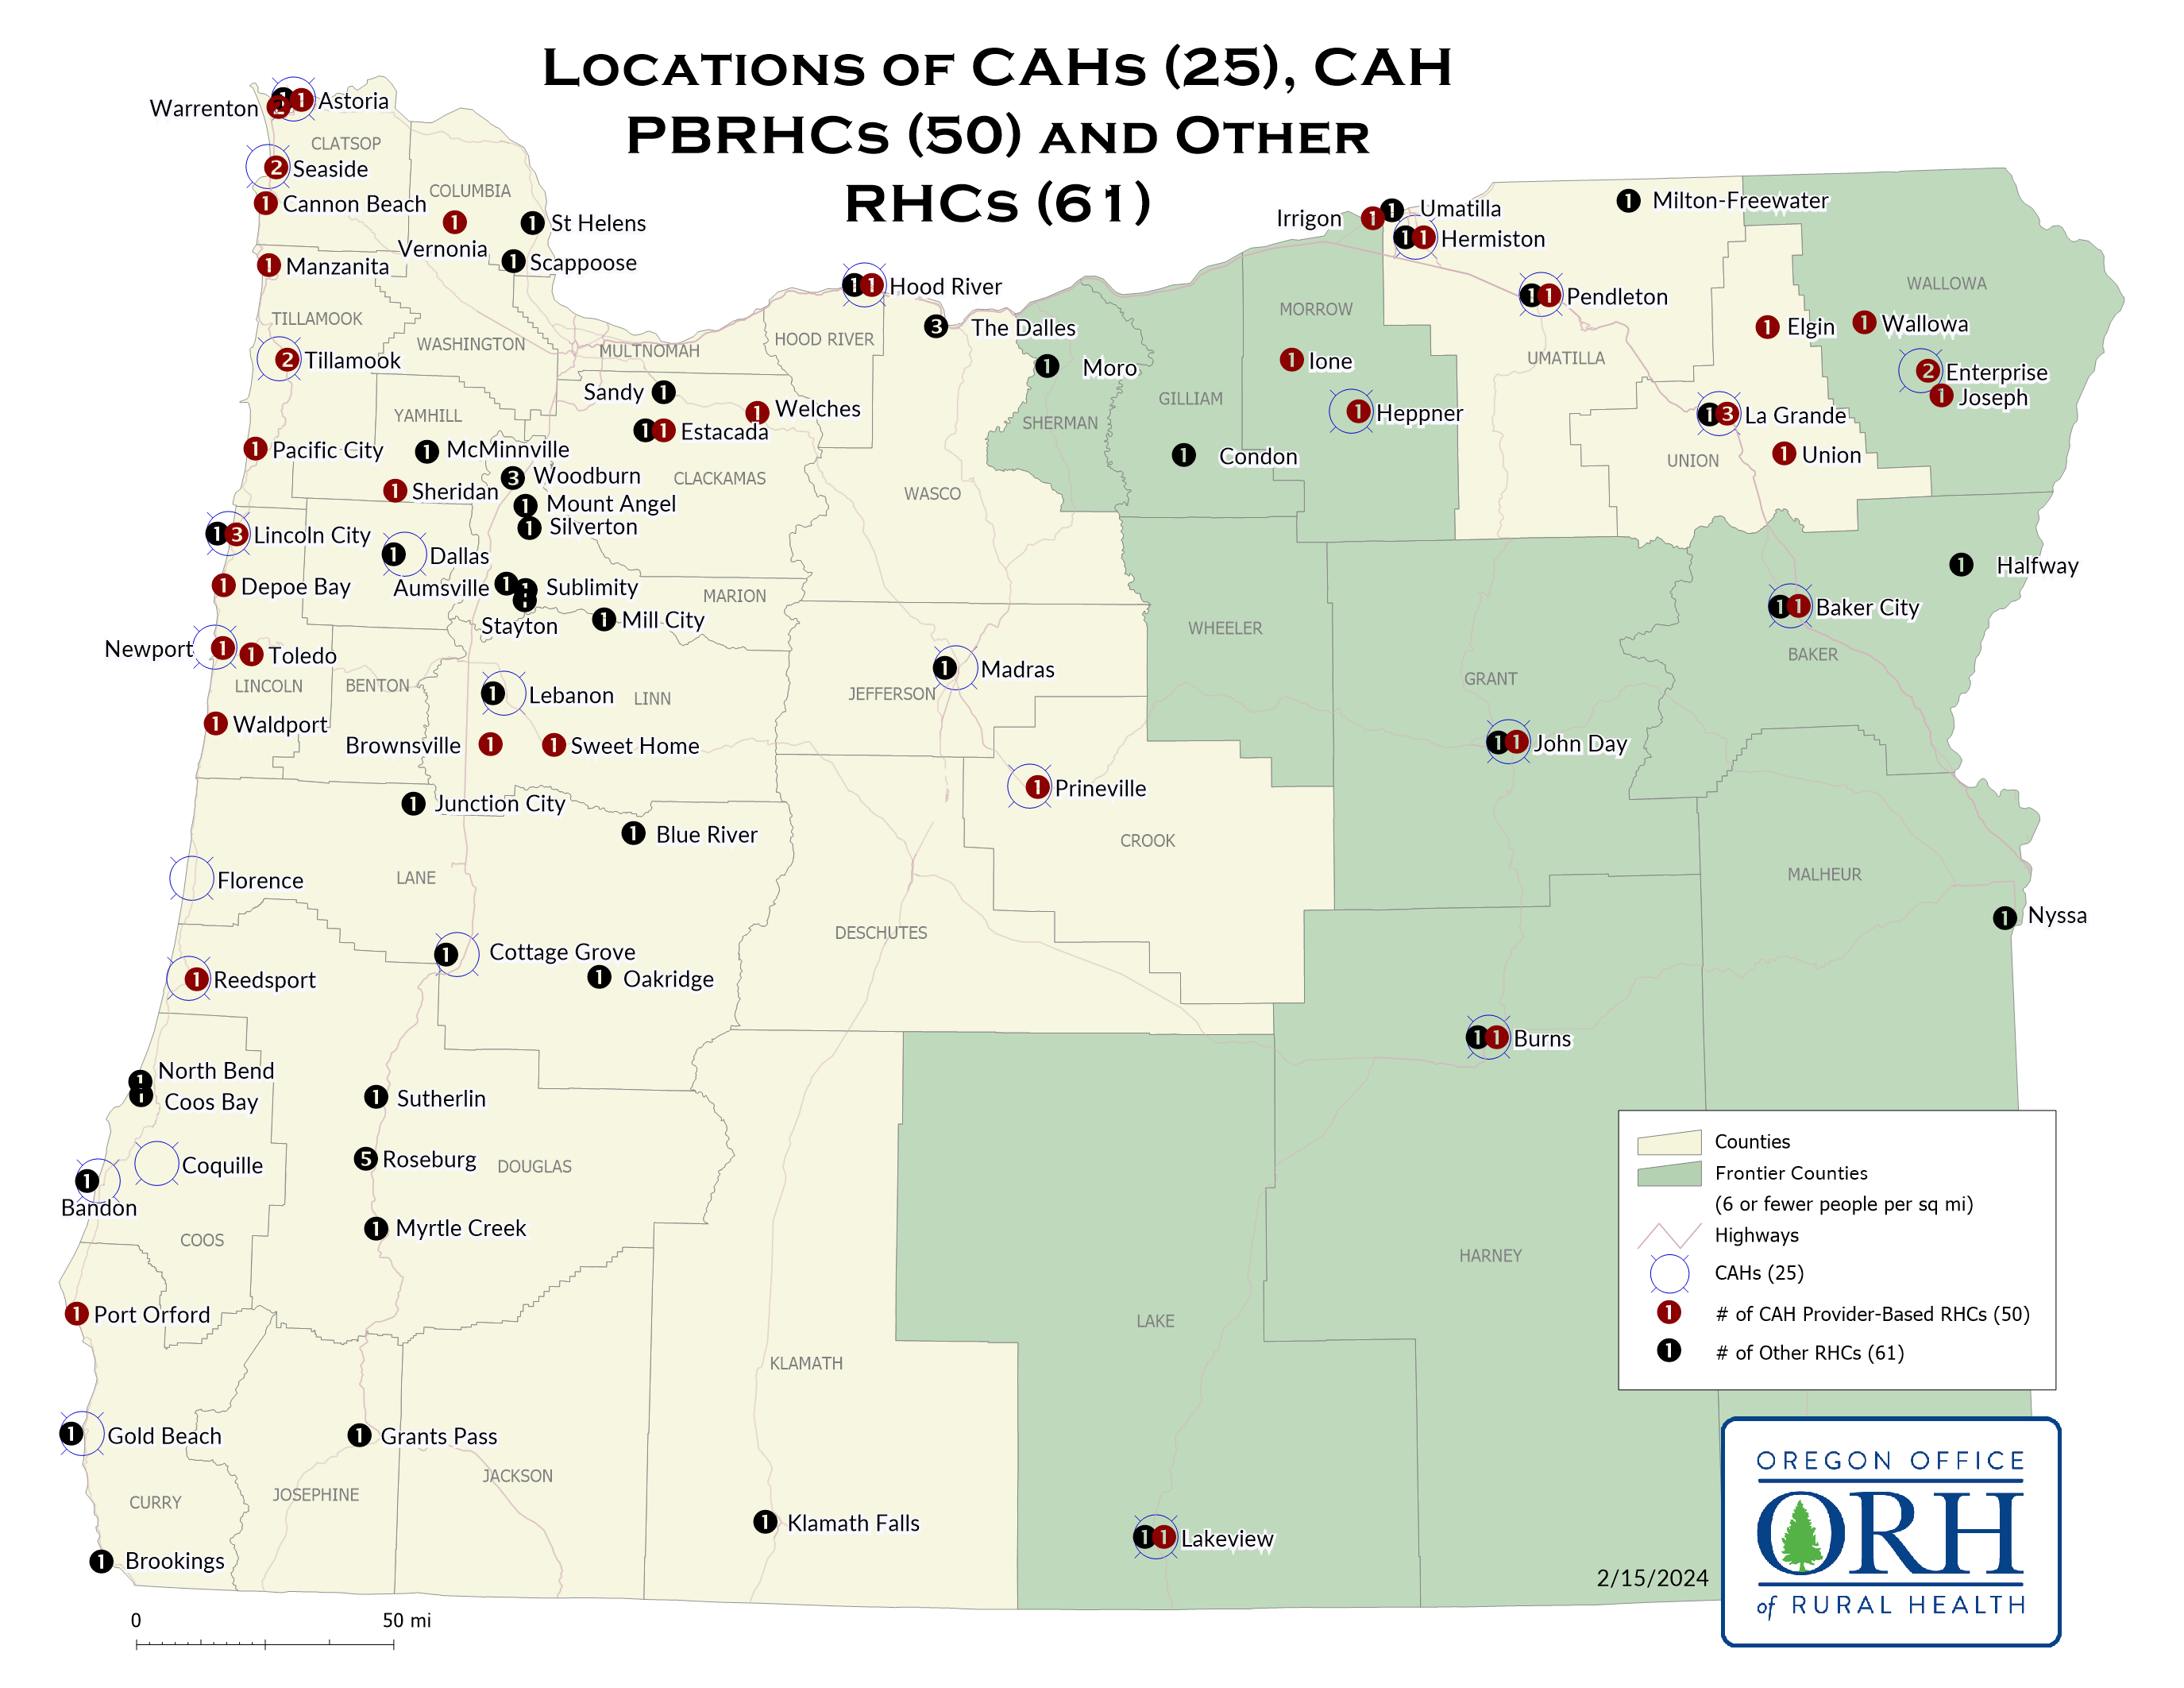 Locations of CAHs, CAH Provider-Based RHCs, and Other RHCs